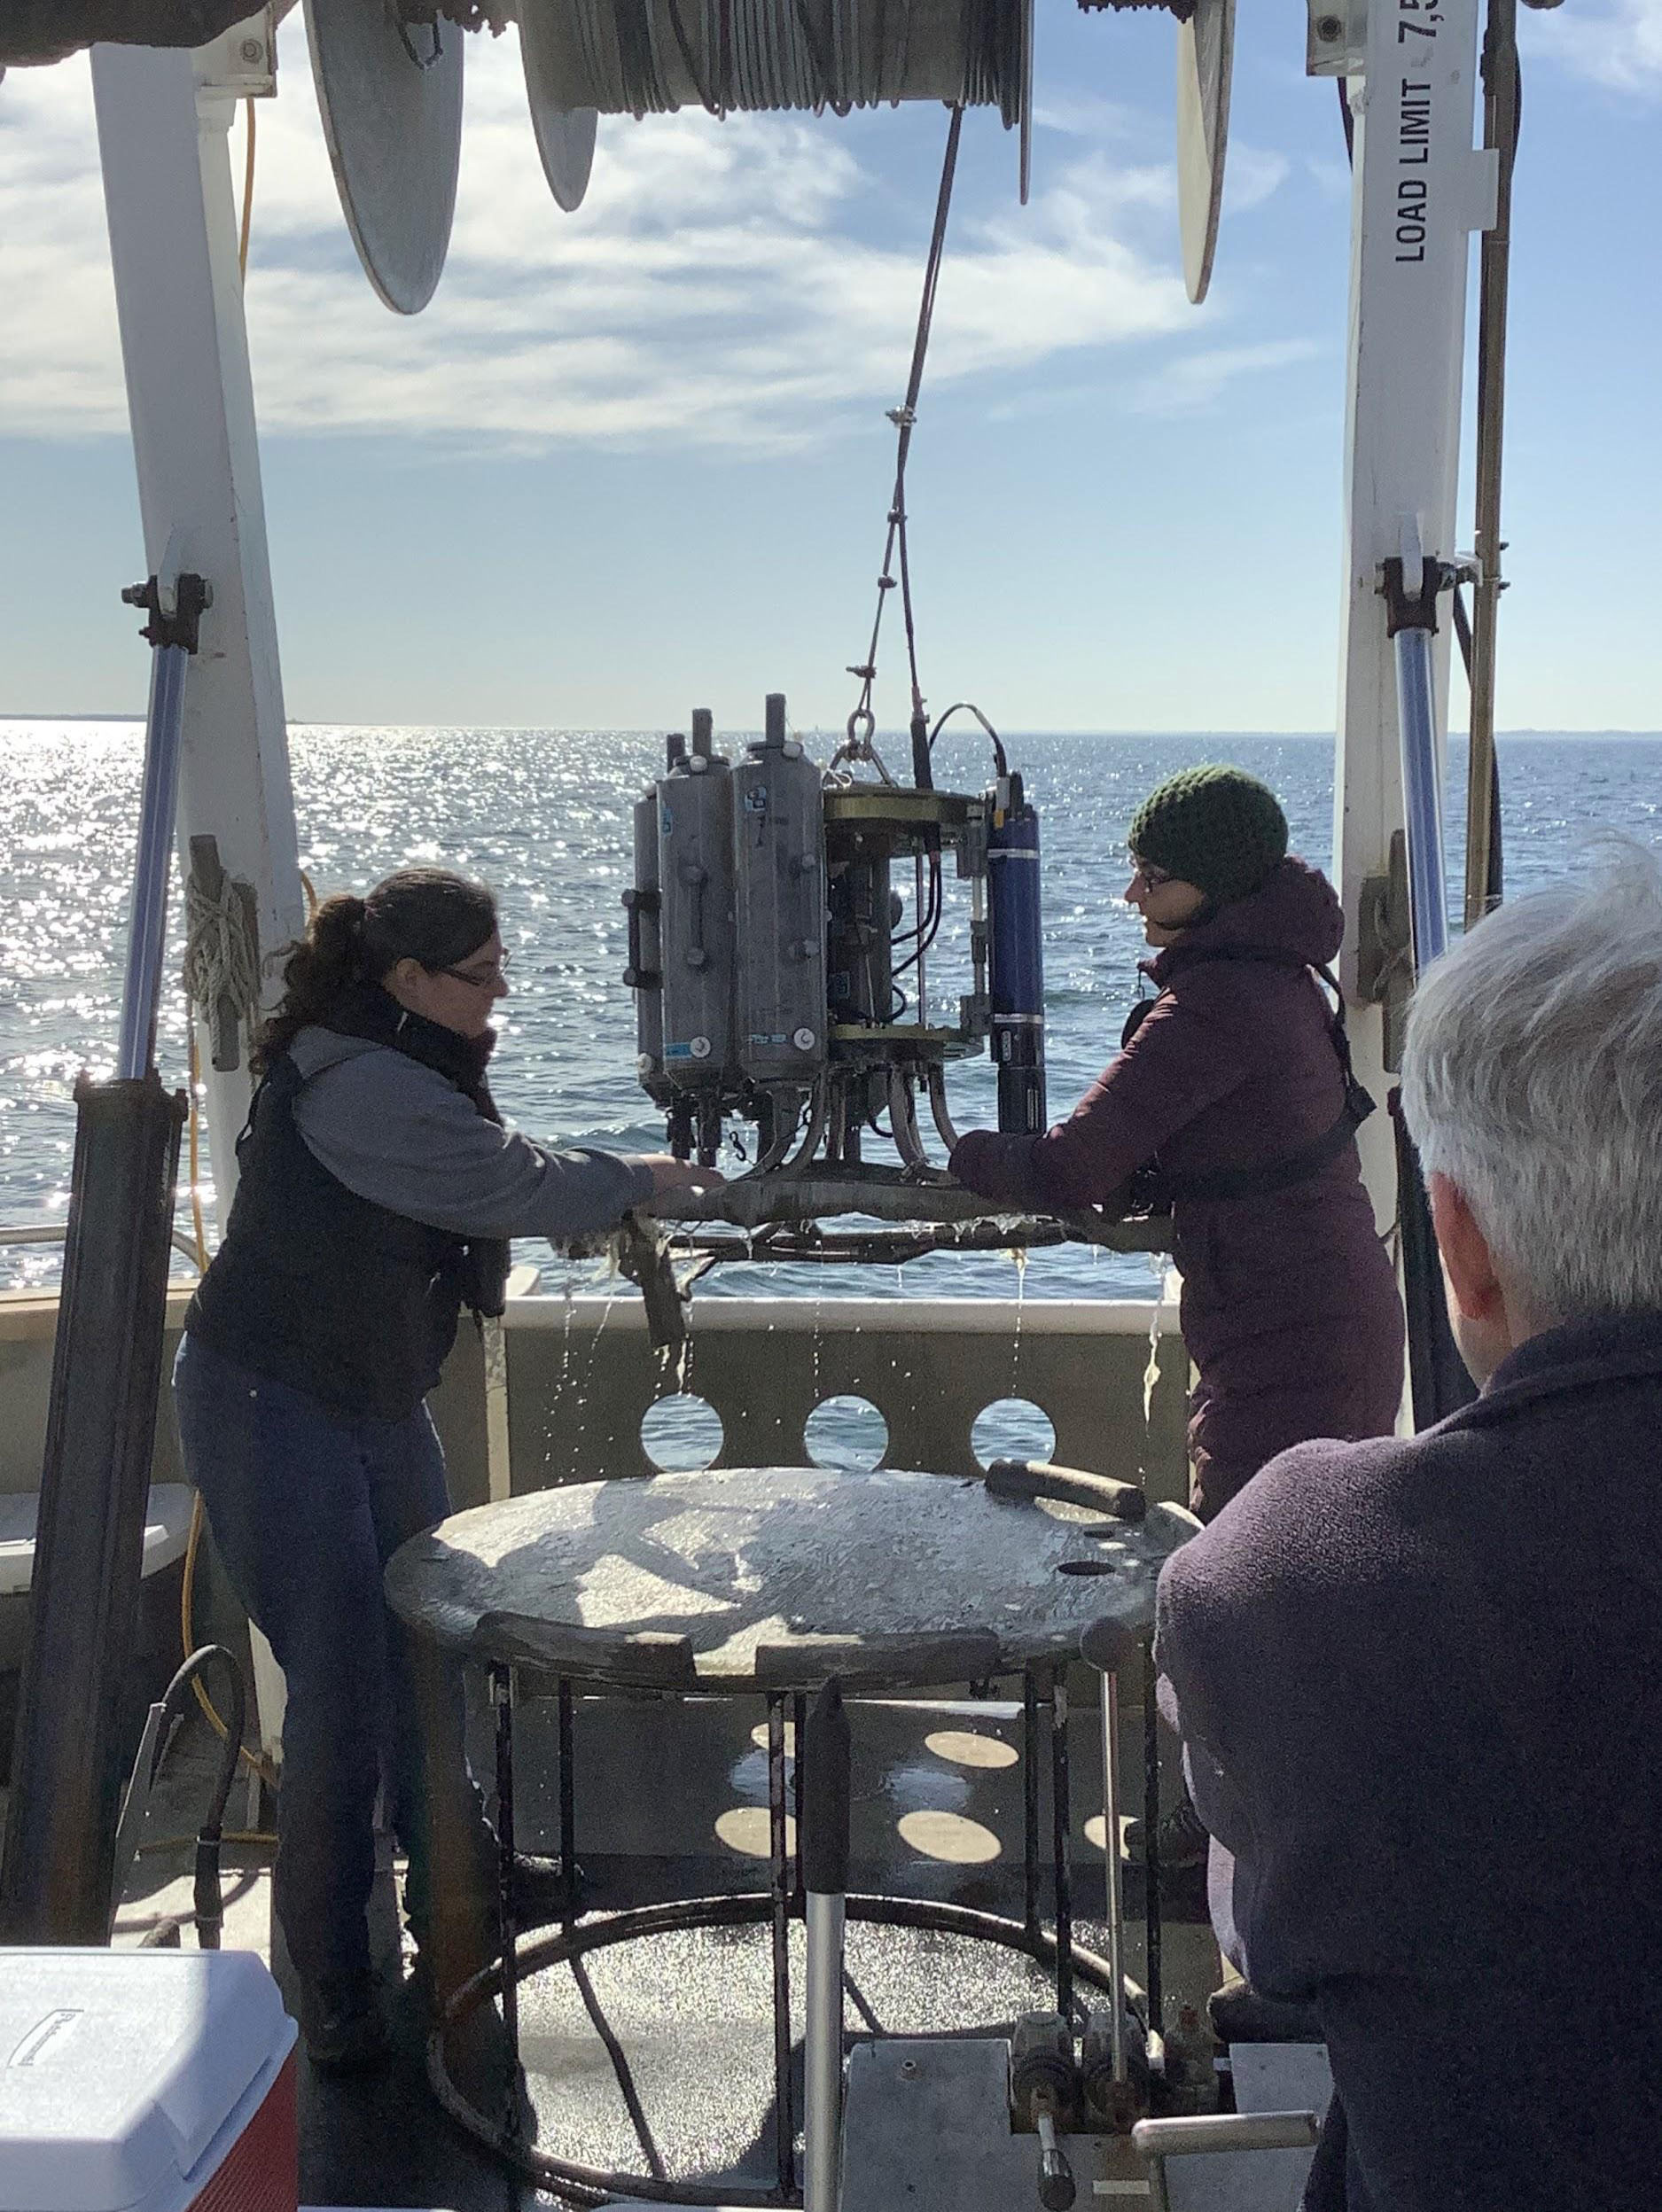 Dr. Vlahos and Katie O'Brien-Clayton retrieve the CTD rosette containing water samples while aboard the research vessel John Dempsey. Water samples are collected using the rosette sampler which holds up to ten niskin bottles, which are set to collect samples at different depths.